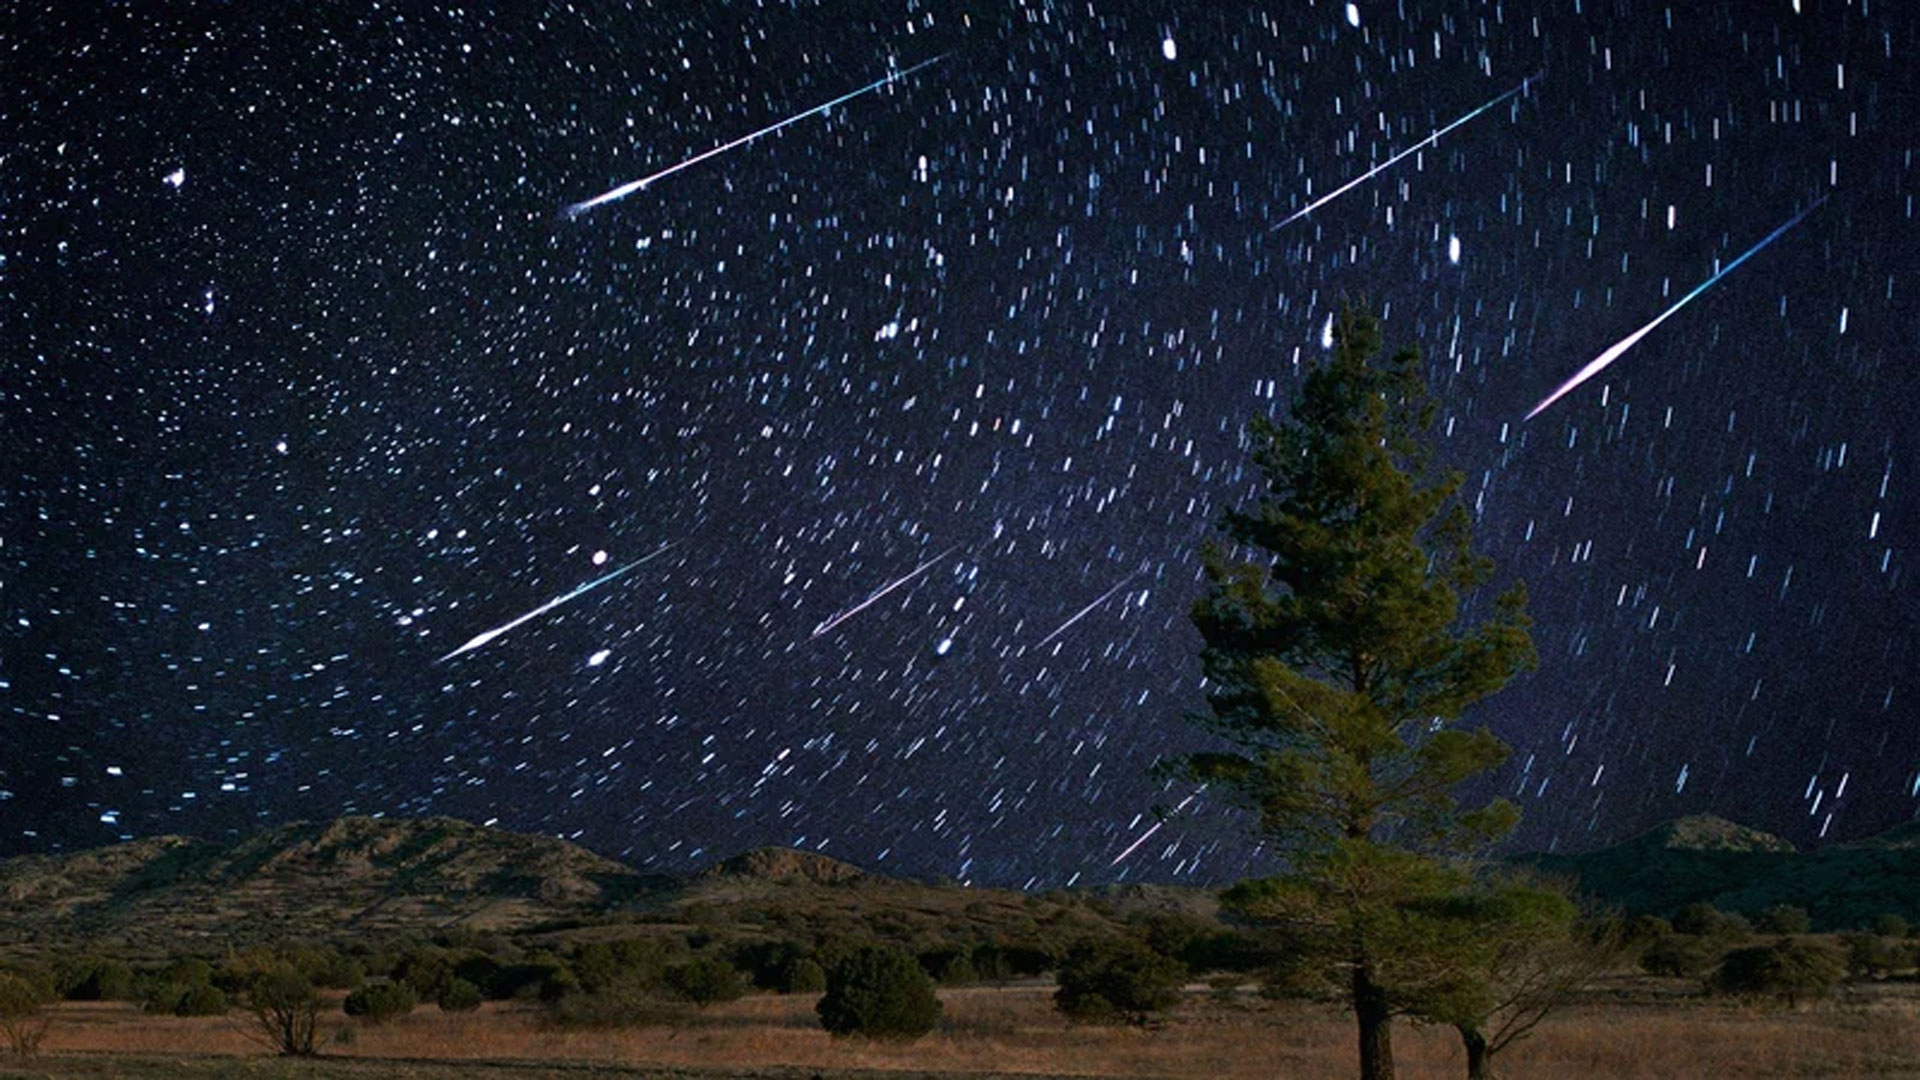 Tonight’s Spectacular Meteor Shower Will Fill the Sky With Radiant